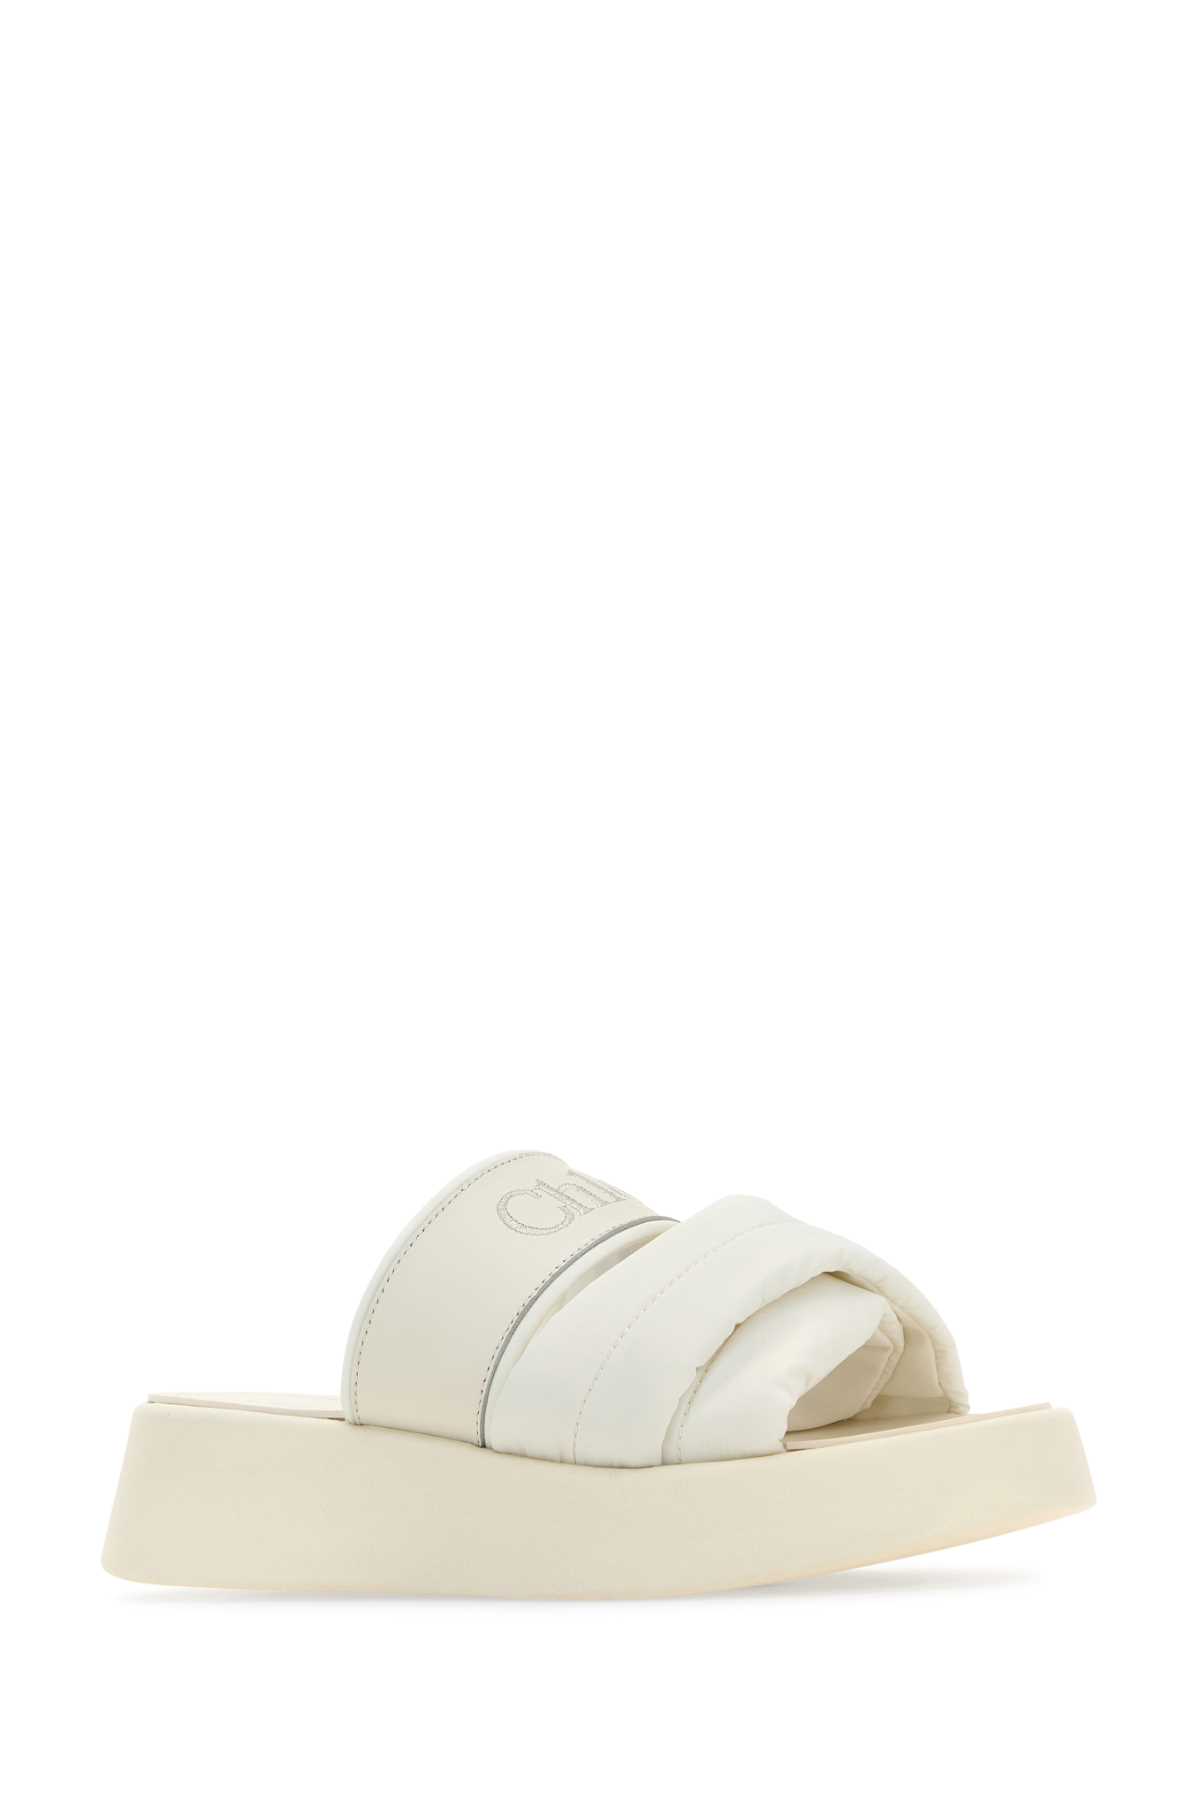 CHLOÉ WHITE FABRIC AND LEATHER MILA SLIPPERS